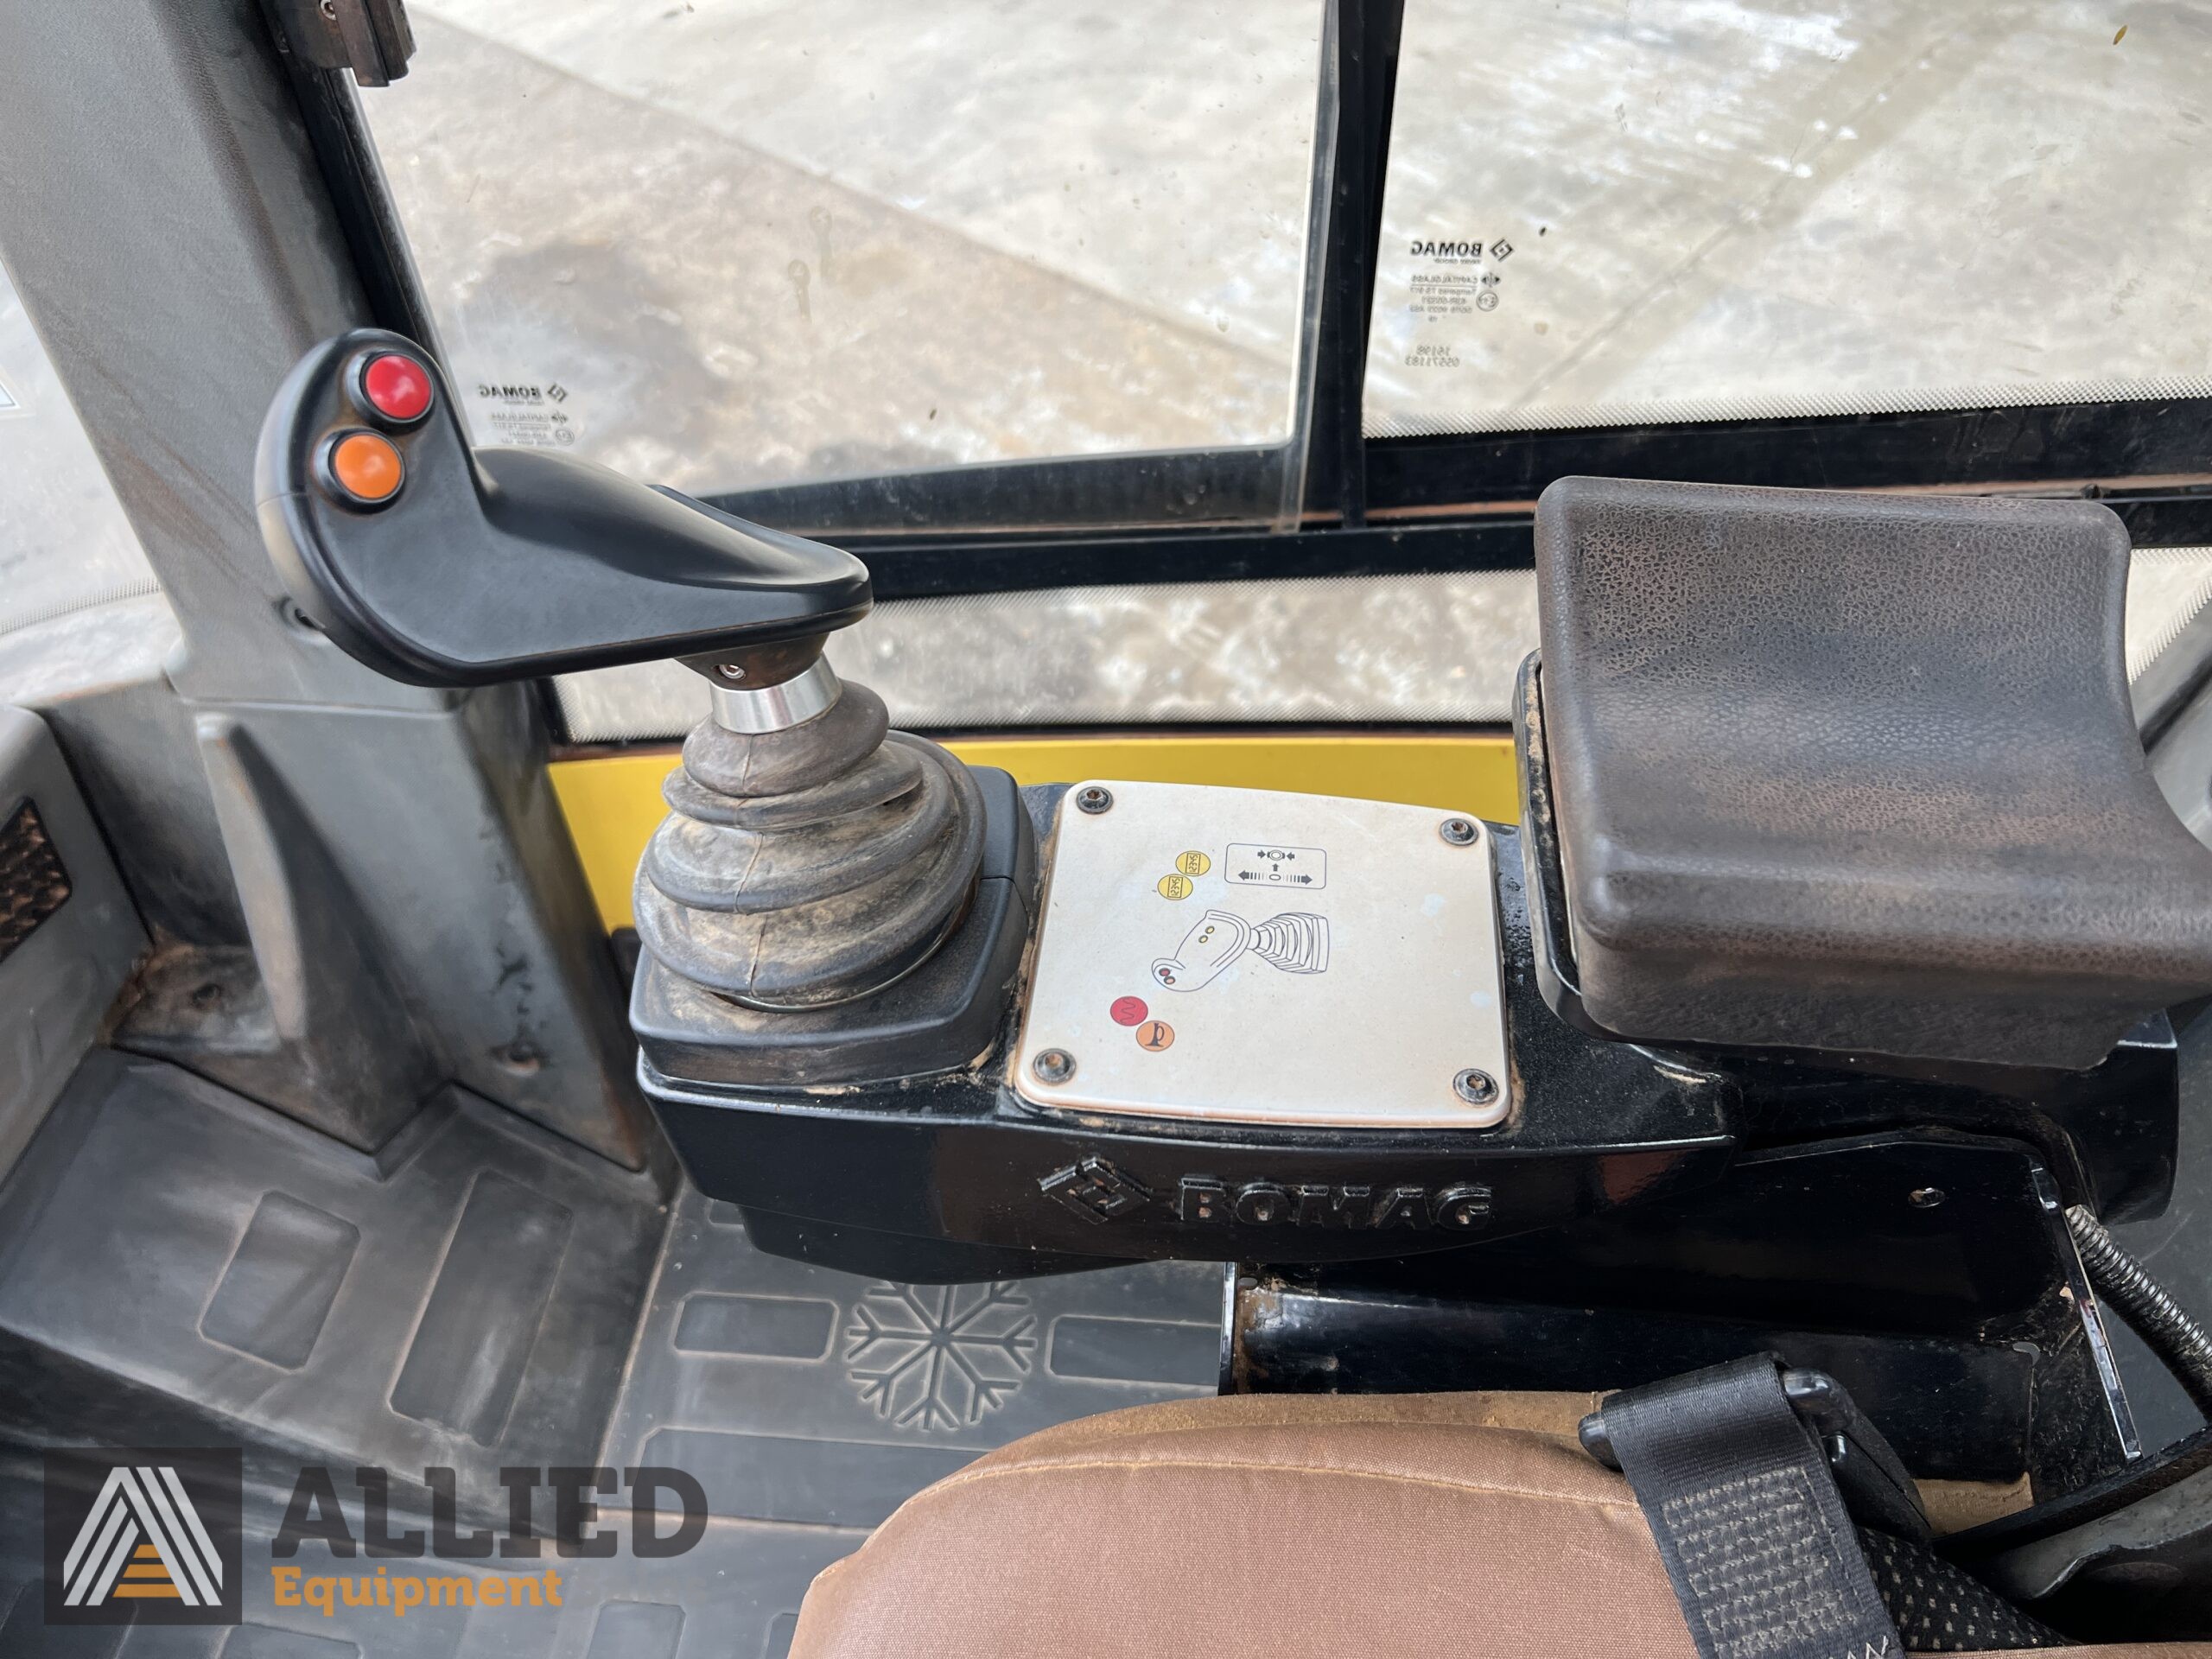 2019 BOMAG BW219PDH-5 PADFOOT ROLLER